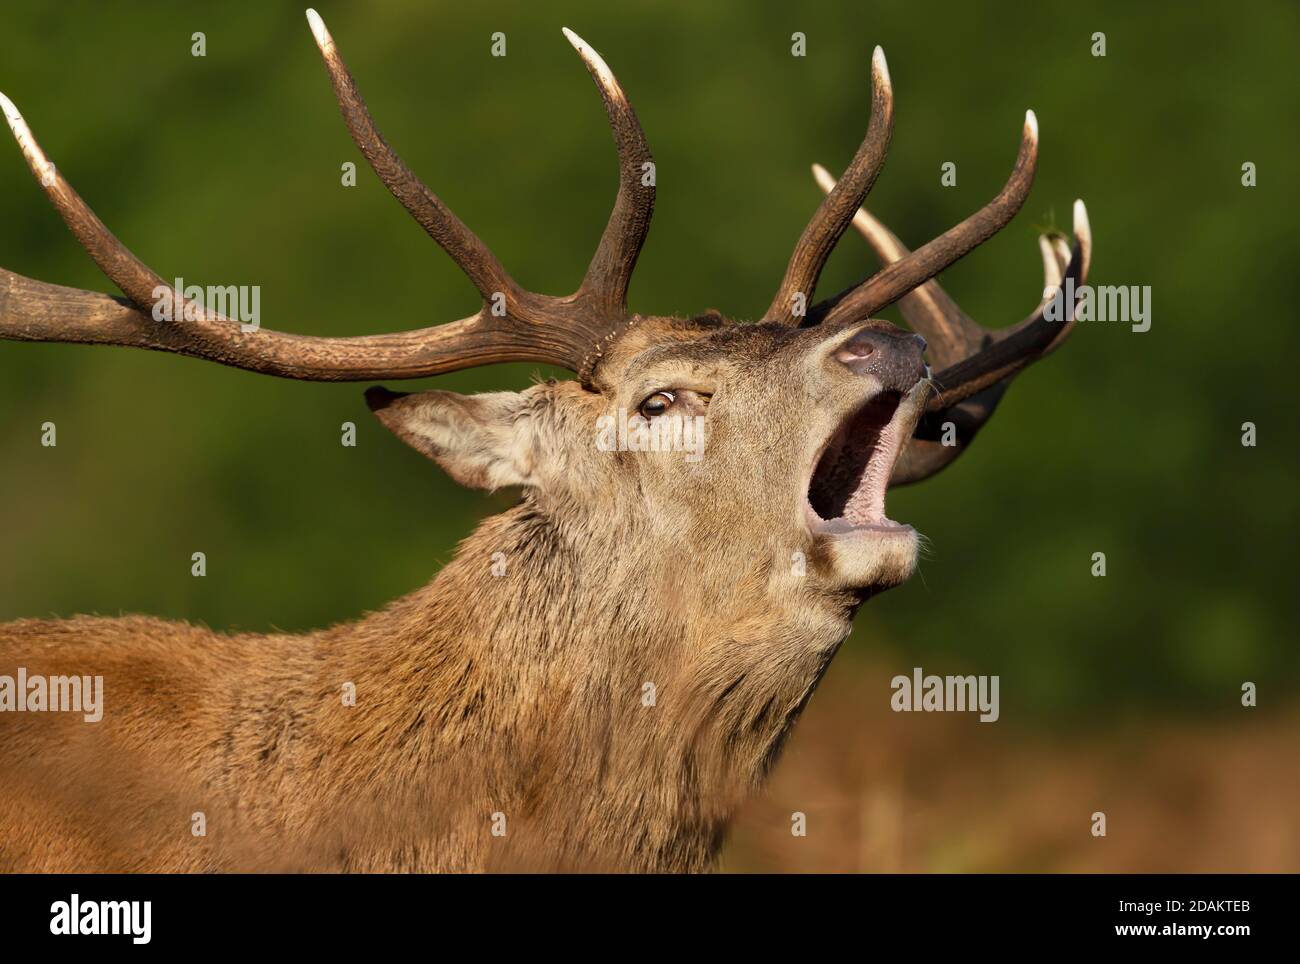 Close-up of a red deer stag bellowing against clear background during rutting season in autumn, UK. Stock Photo